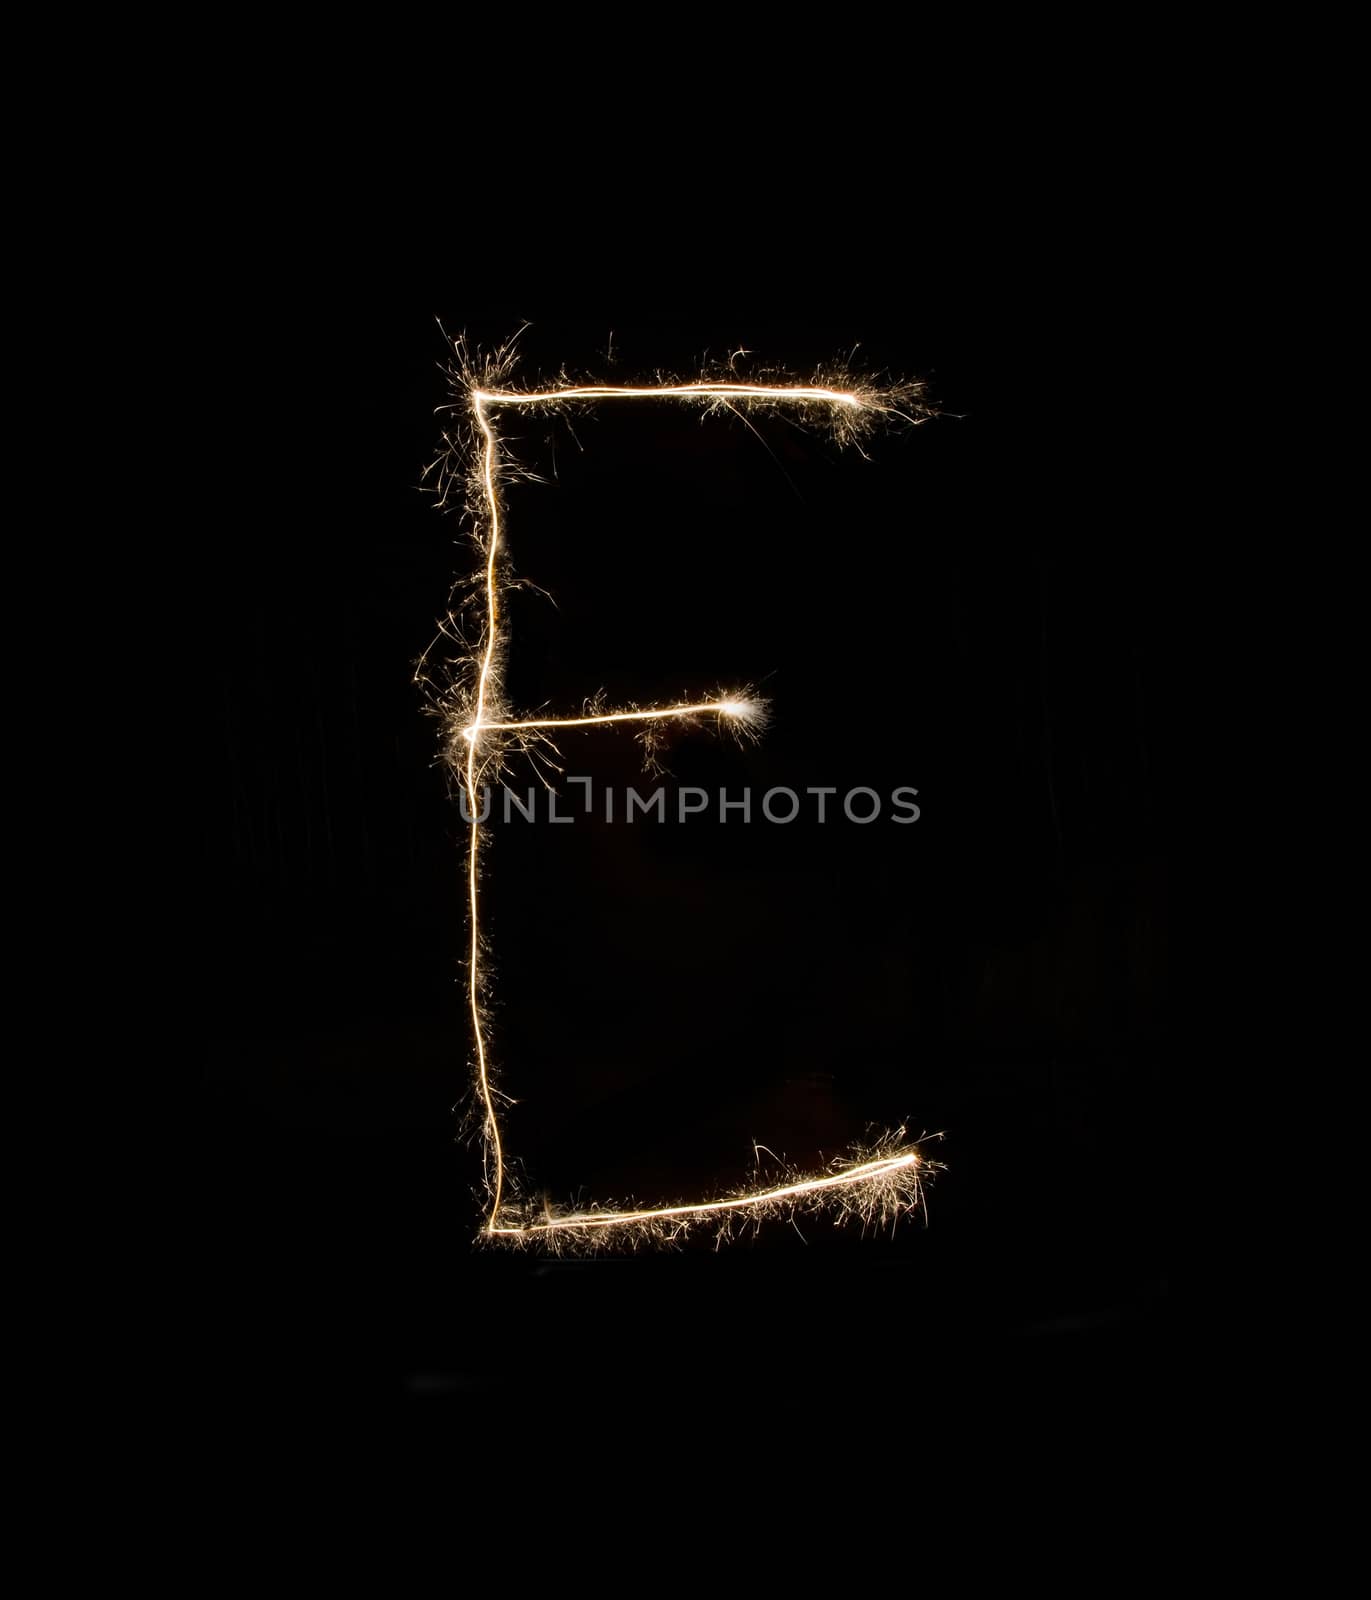 Letter E drew with spakrs on a black background.